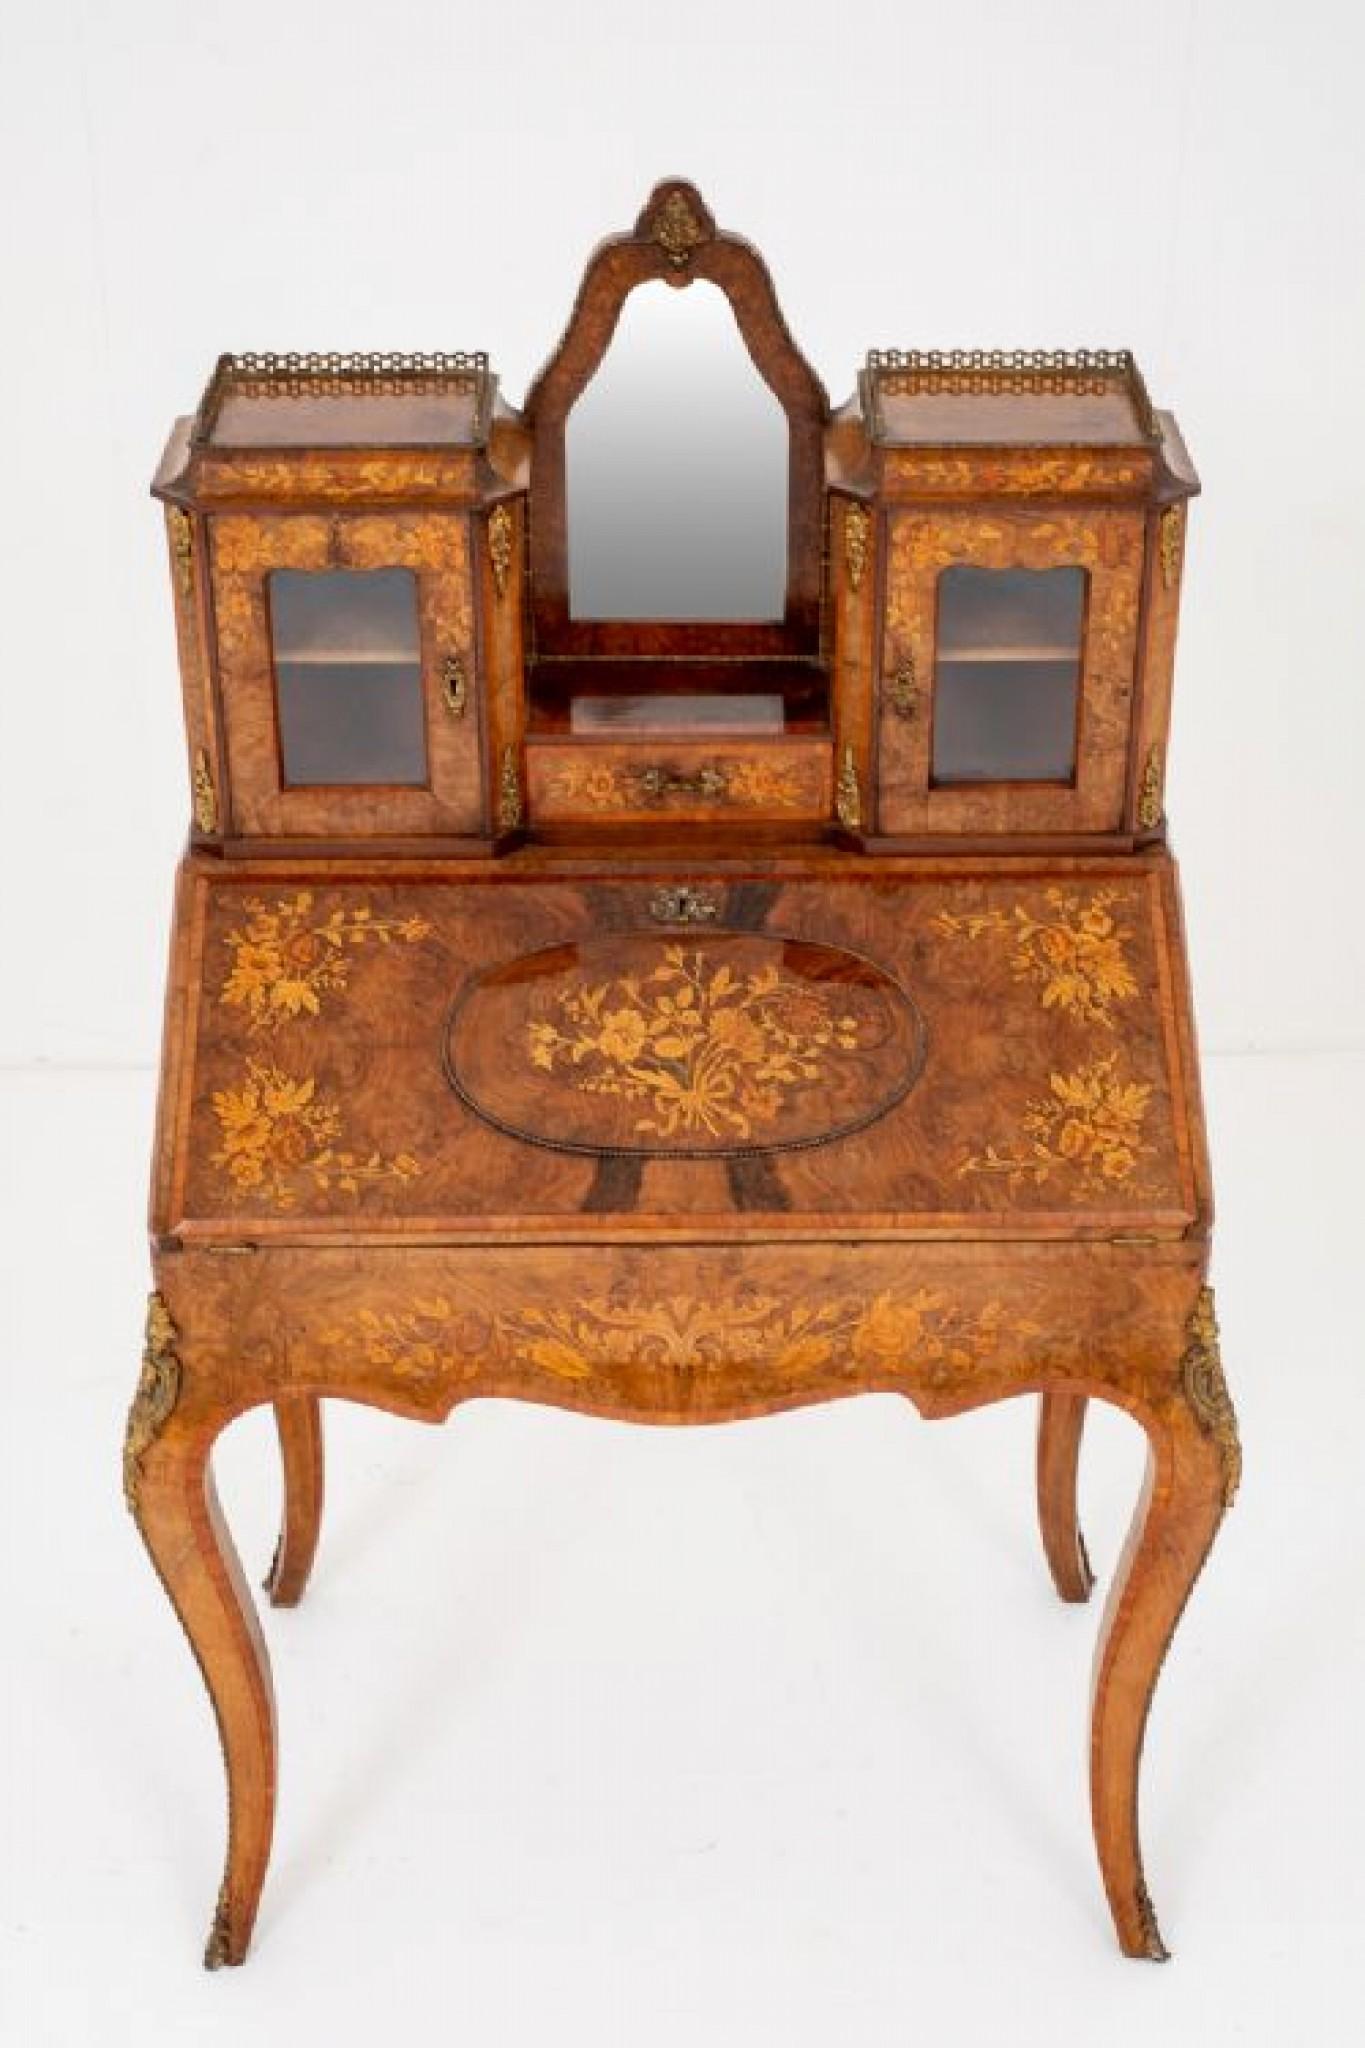 Wonderful French Walnut and Marquetry Bonheur de Jour.
Standing on Typical French Swept Legs with Ormolu Mounts and Kingwood Cross banding.
The Fall having a raised tablet with beautiful floral inlays.
circa 1860
The upper section featuring a